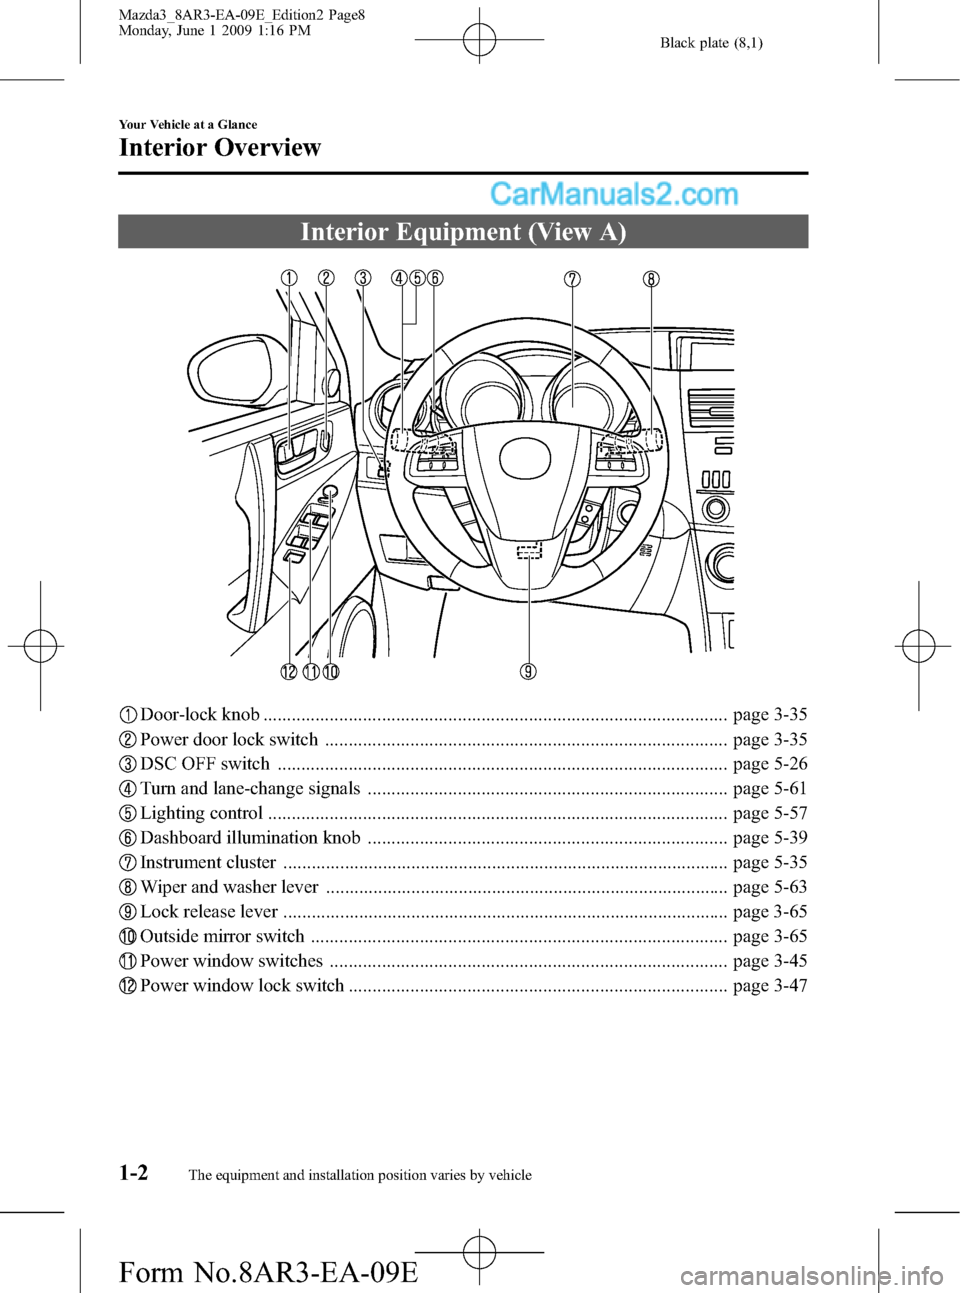 MAZDA MODEL MAZDASPEED 3 2010  Owners Manual (in English) Black plate (8,1)
Interior Equipment (View A)
Door-lock knob .................................................................................................. page 3-35
Power door lock switch .......